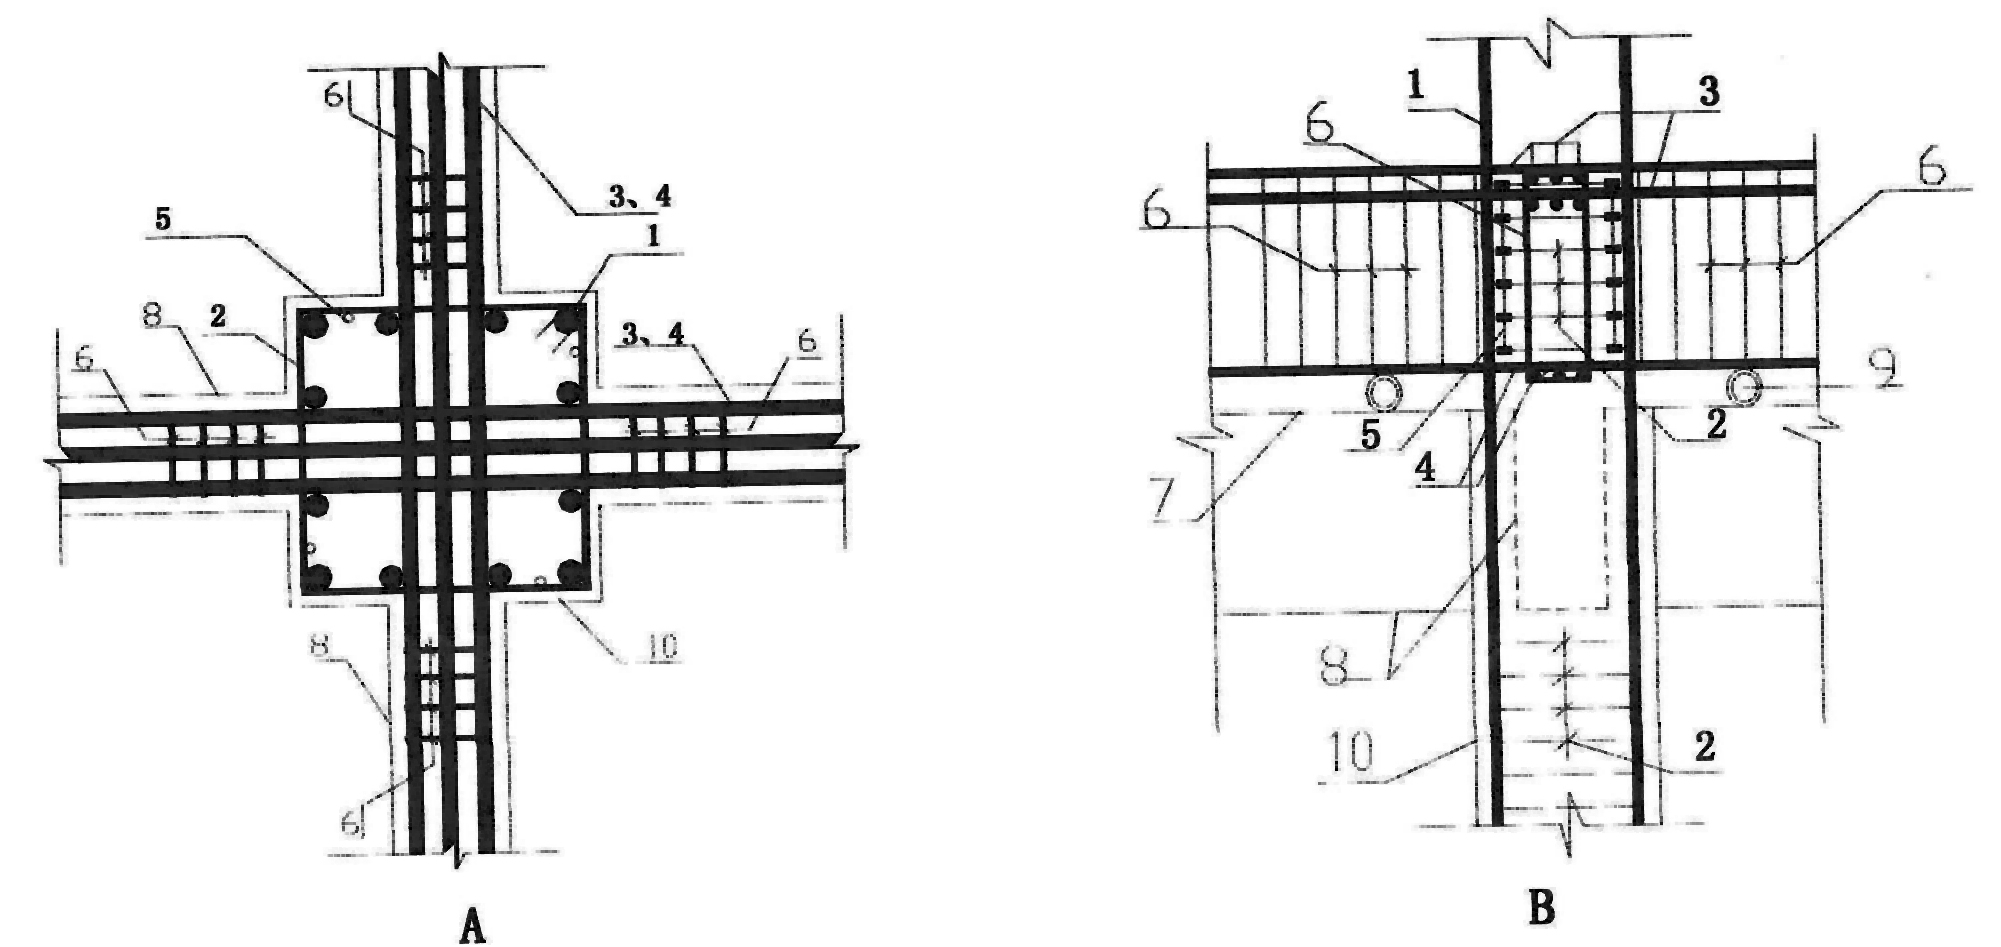 Improved method for installing reinforcement cage in beam column joint zone of reinforced concrete frame structure